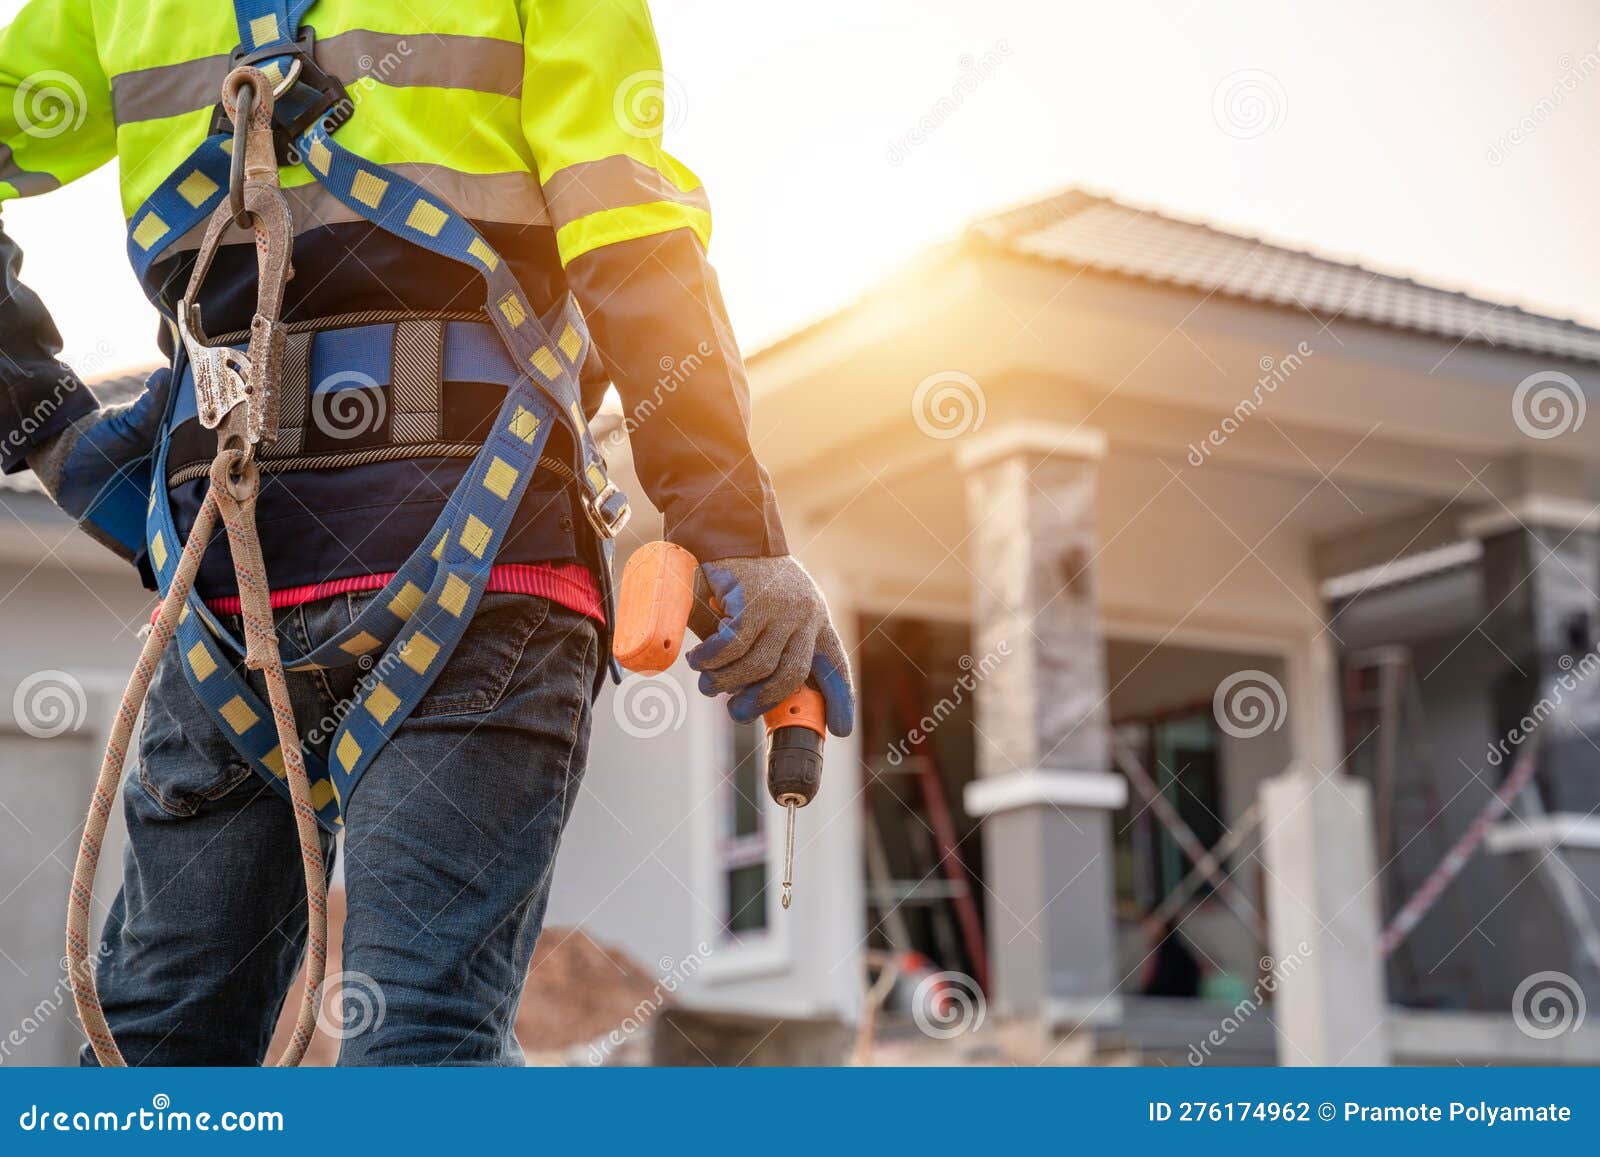 A Roofer Wearing Safety Harness Belt Stands Holding an Air Gun or